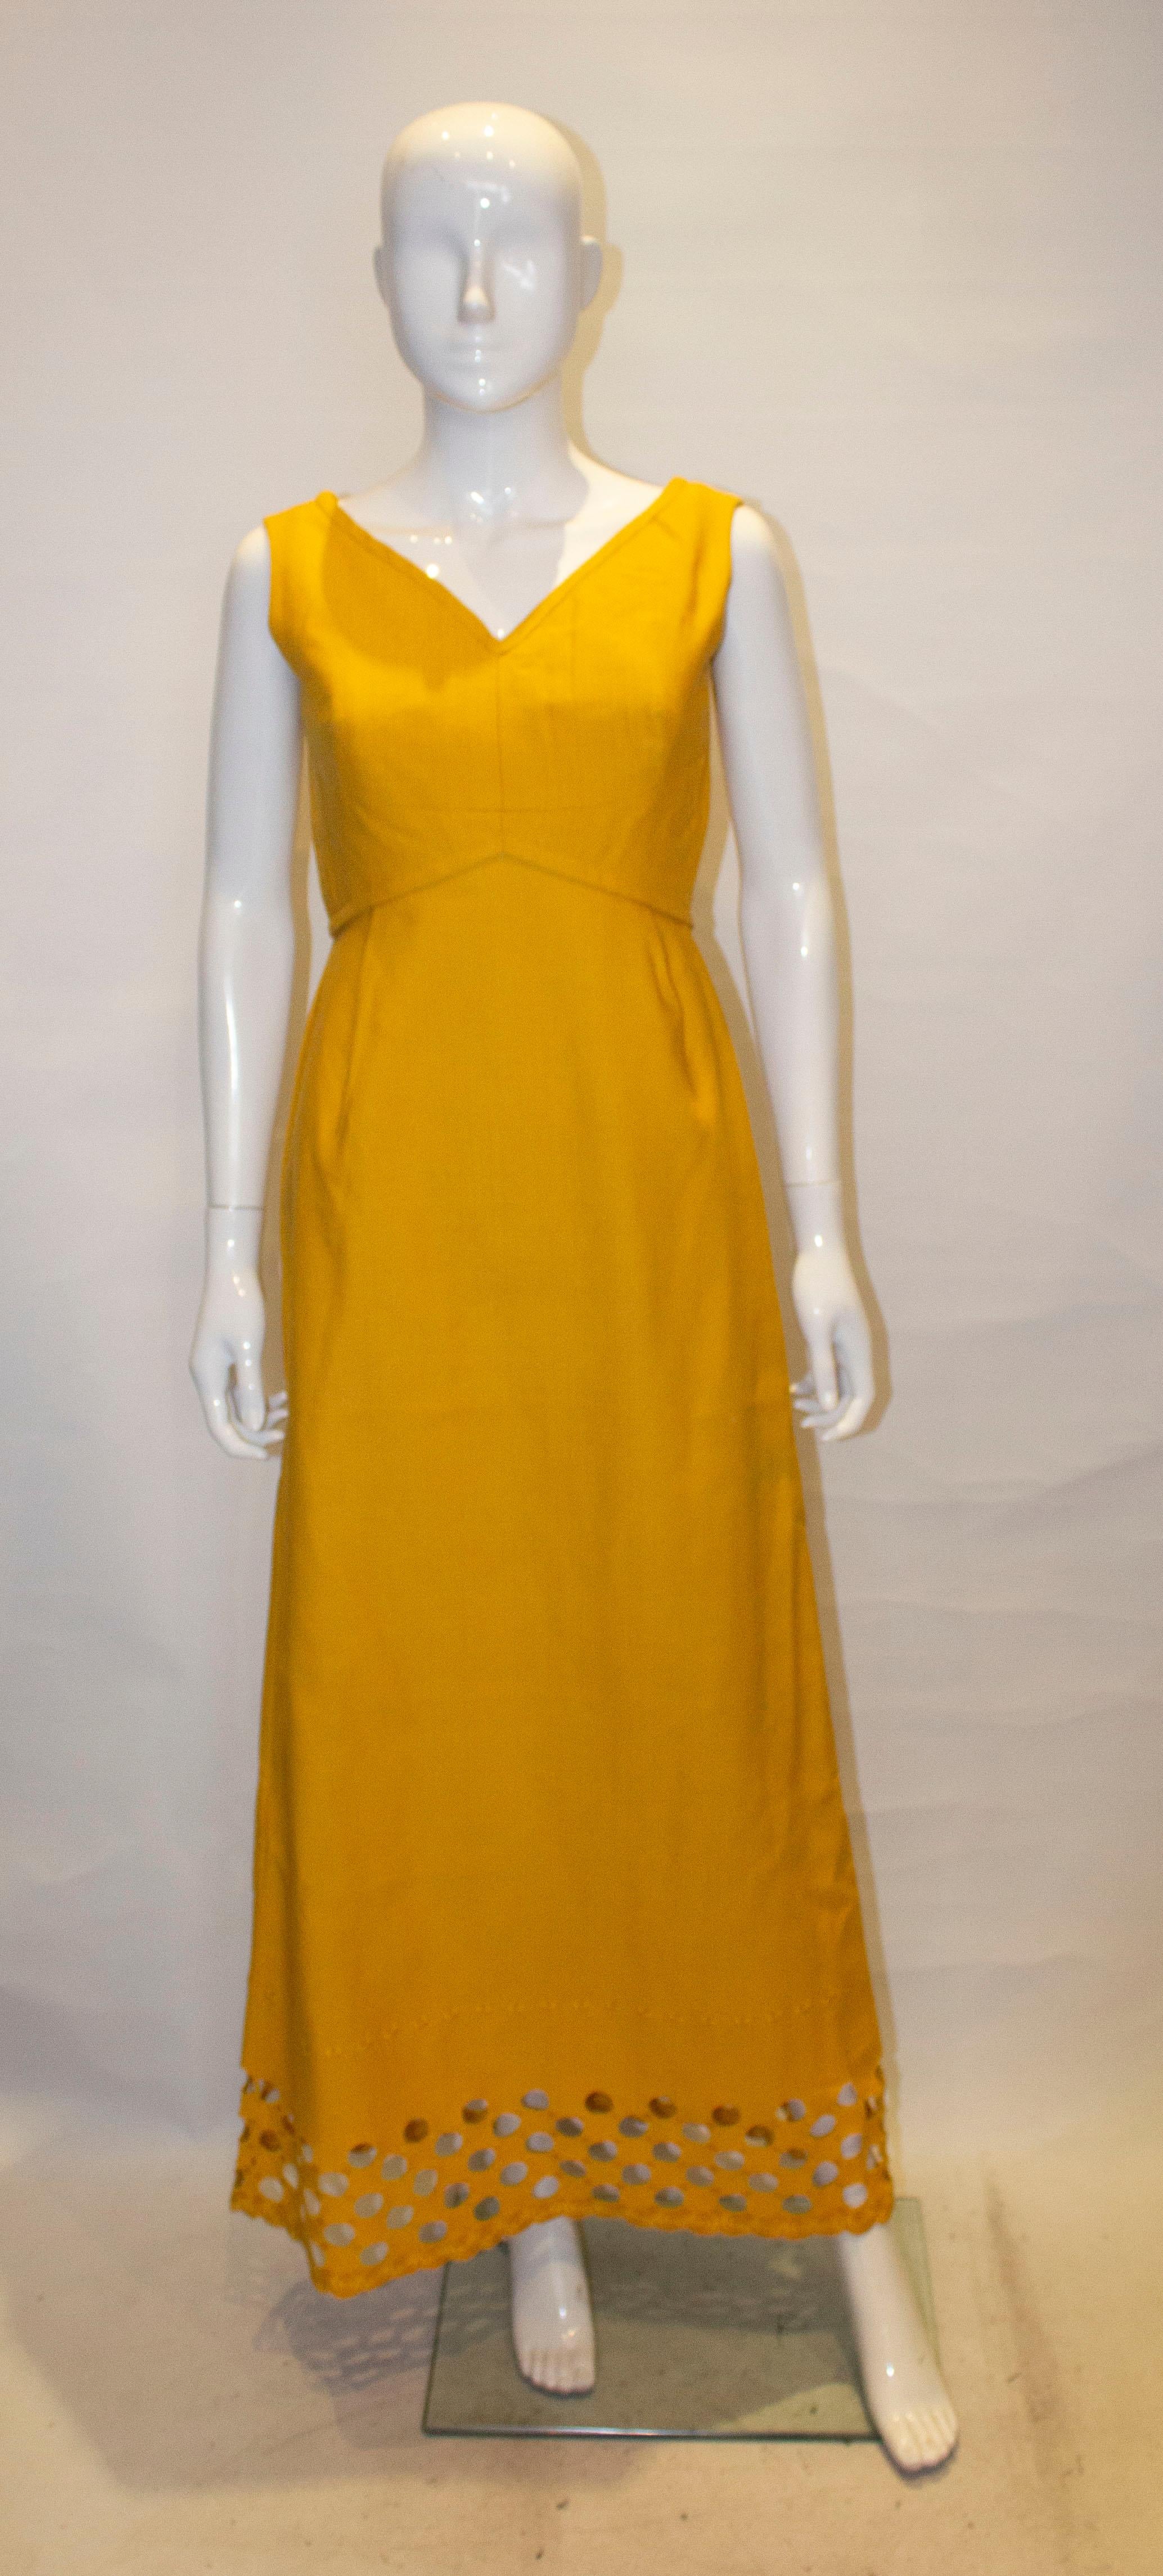 A chic vintge evening dress by Susan Small. In an attractive soft gold/mustard colour, the dress has a v neckline and backline with cut out and embroidery detail at the hem. It is fully lined.